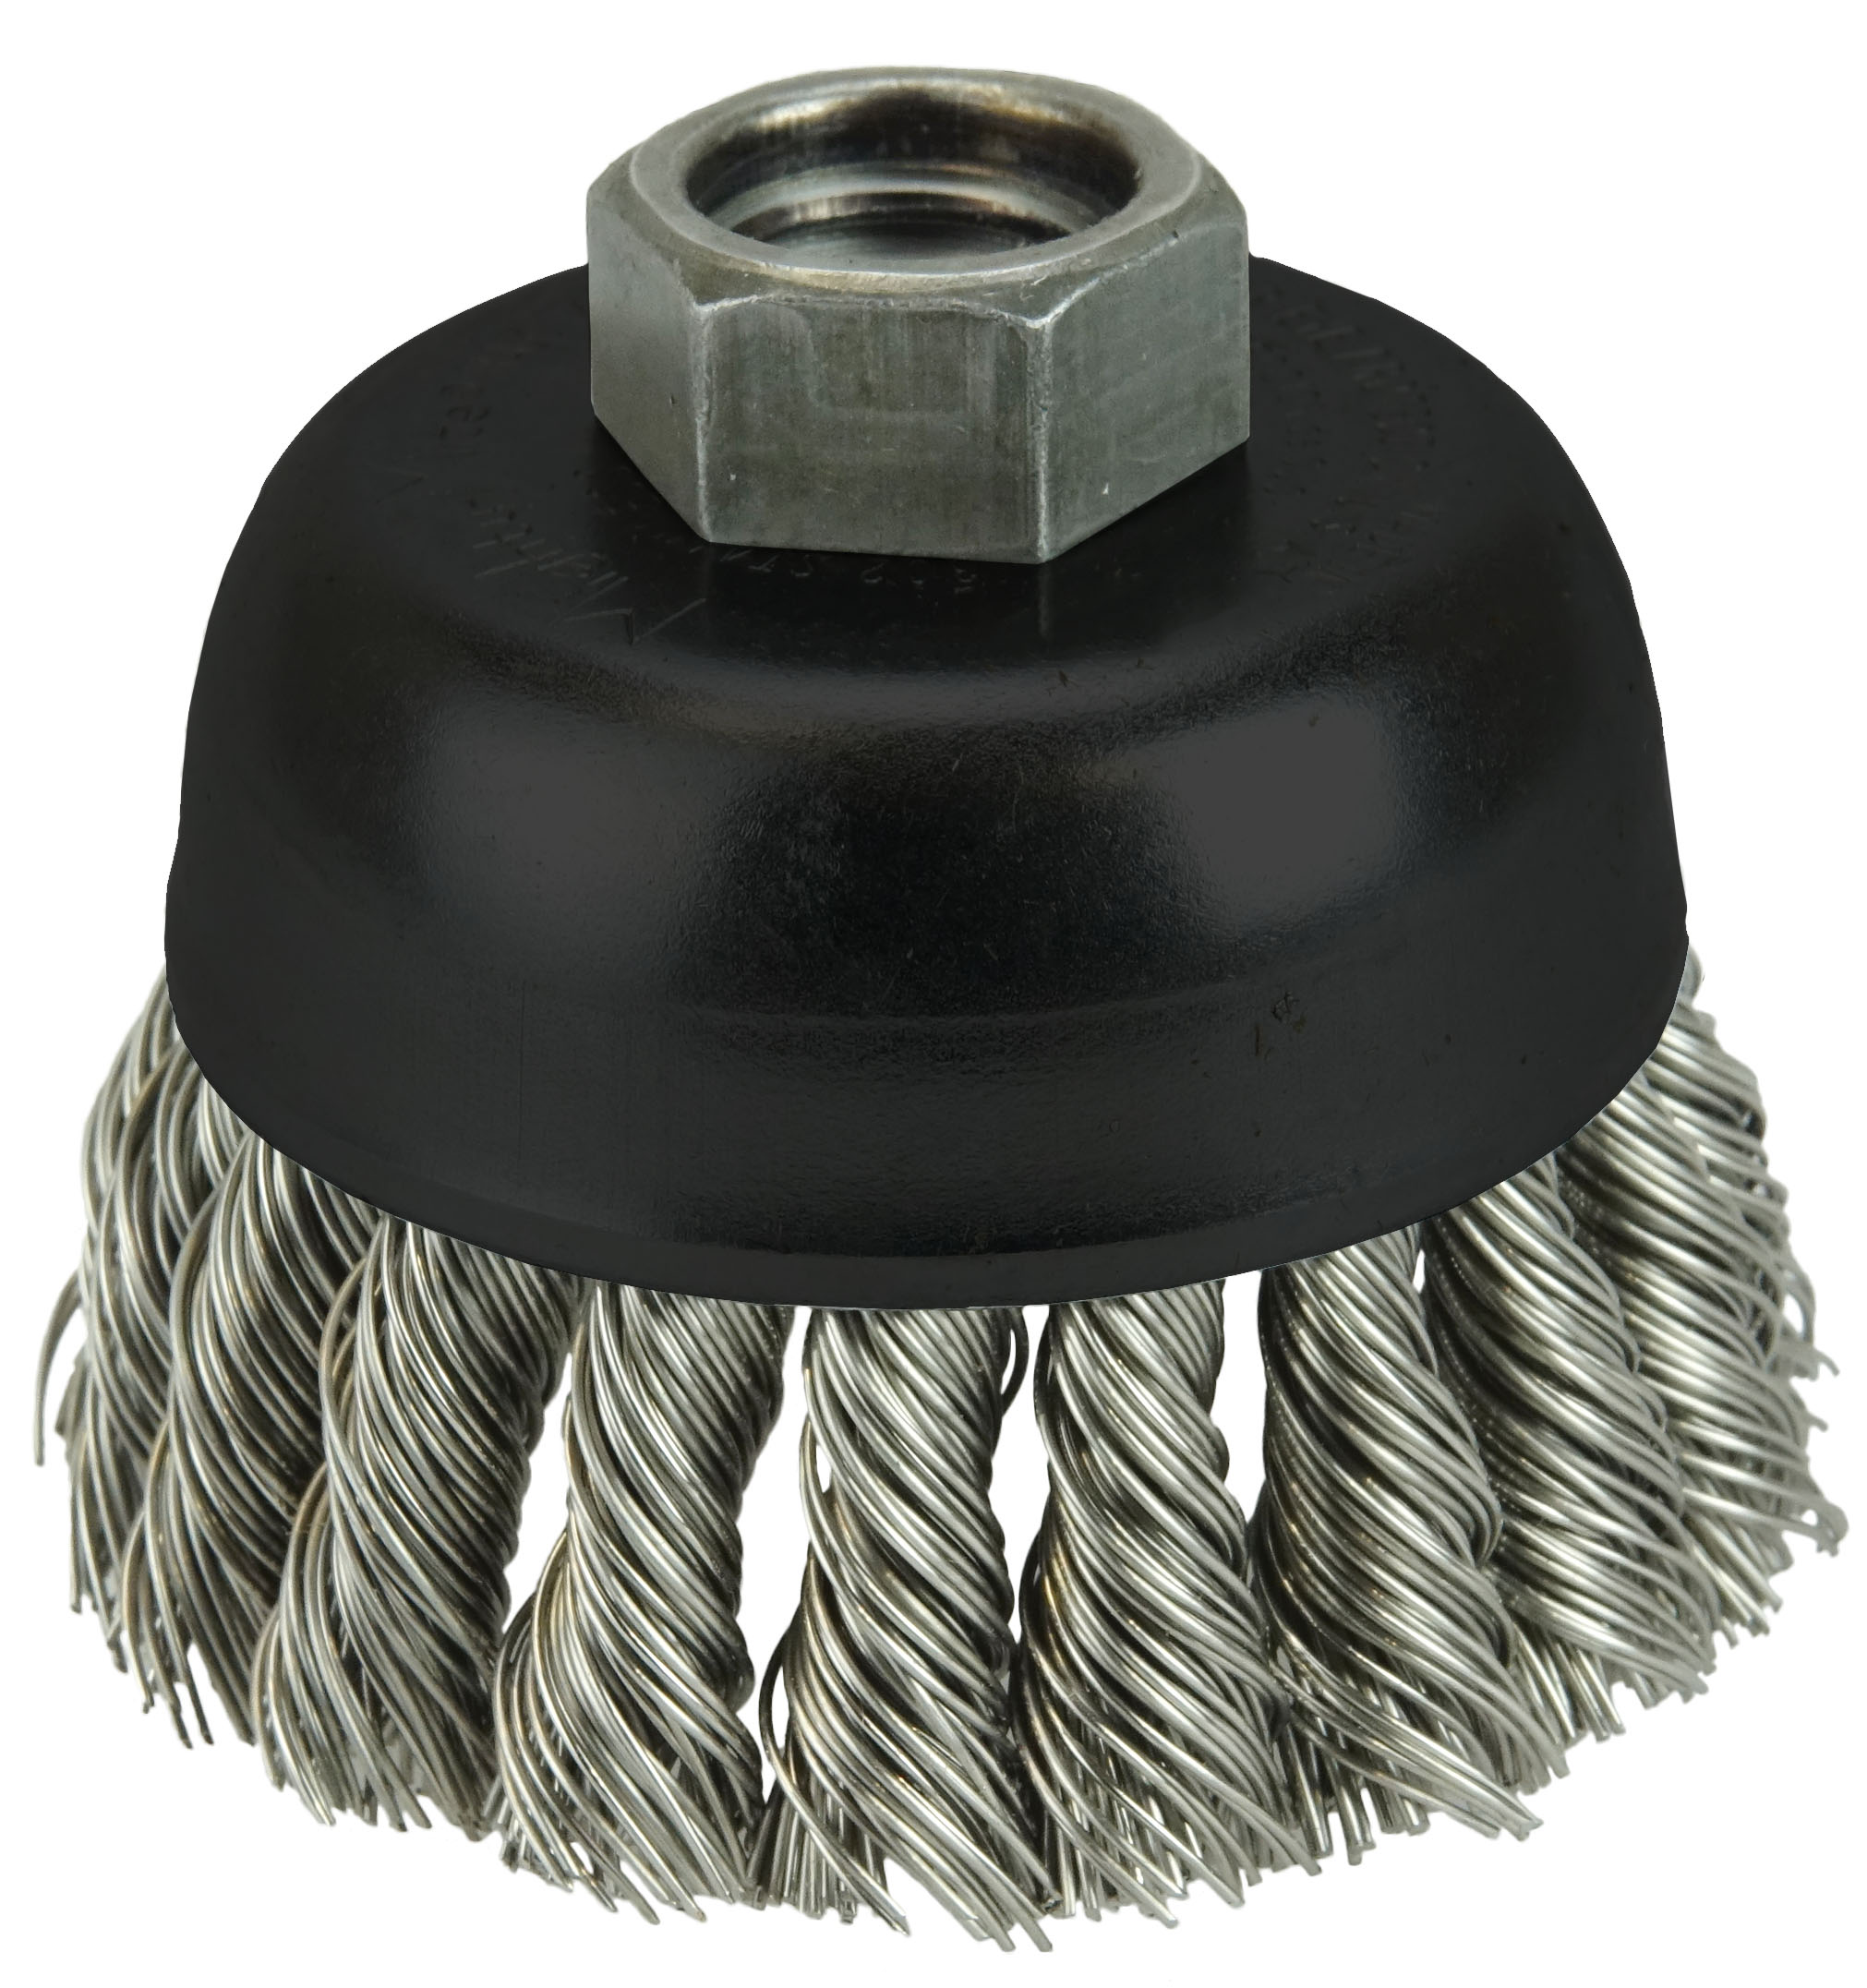 1 3/4 Crimped Wire Utility Cup Brush .0118 Steel Fill, 1/4 Stem